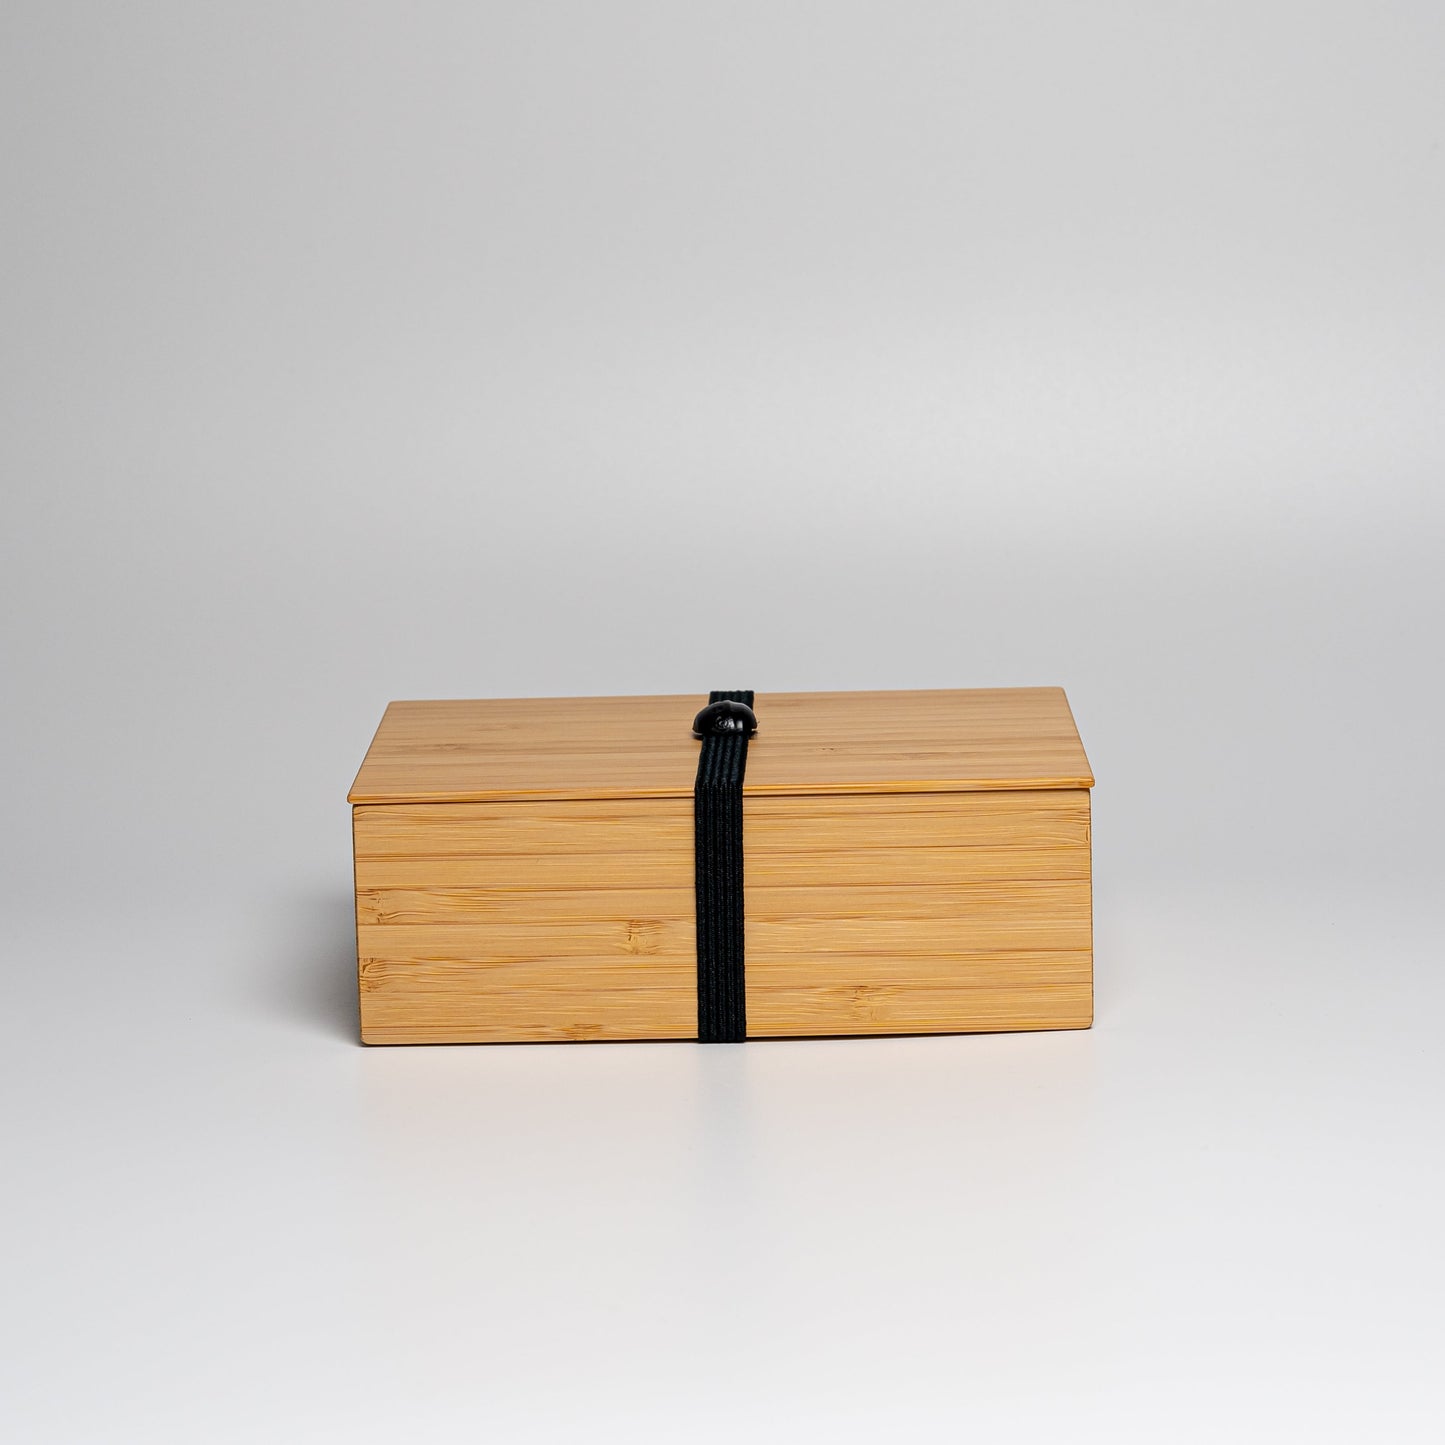 A bamboo bento box with black strap on a white background